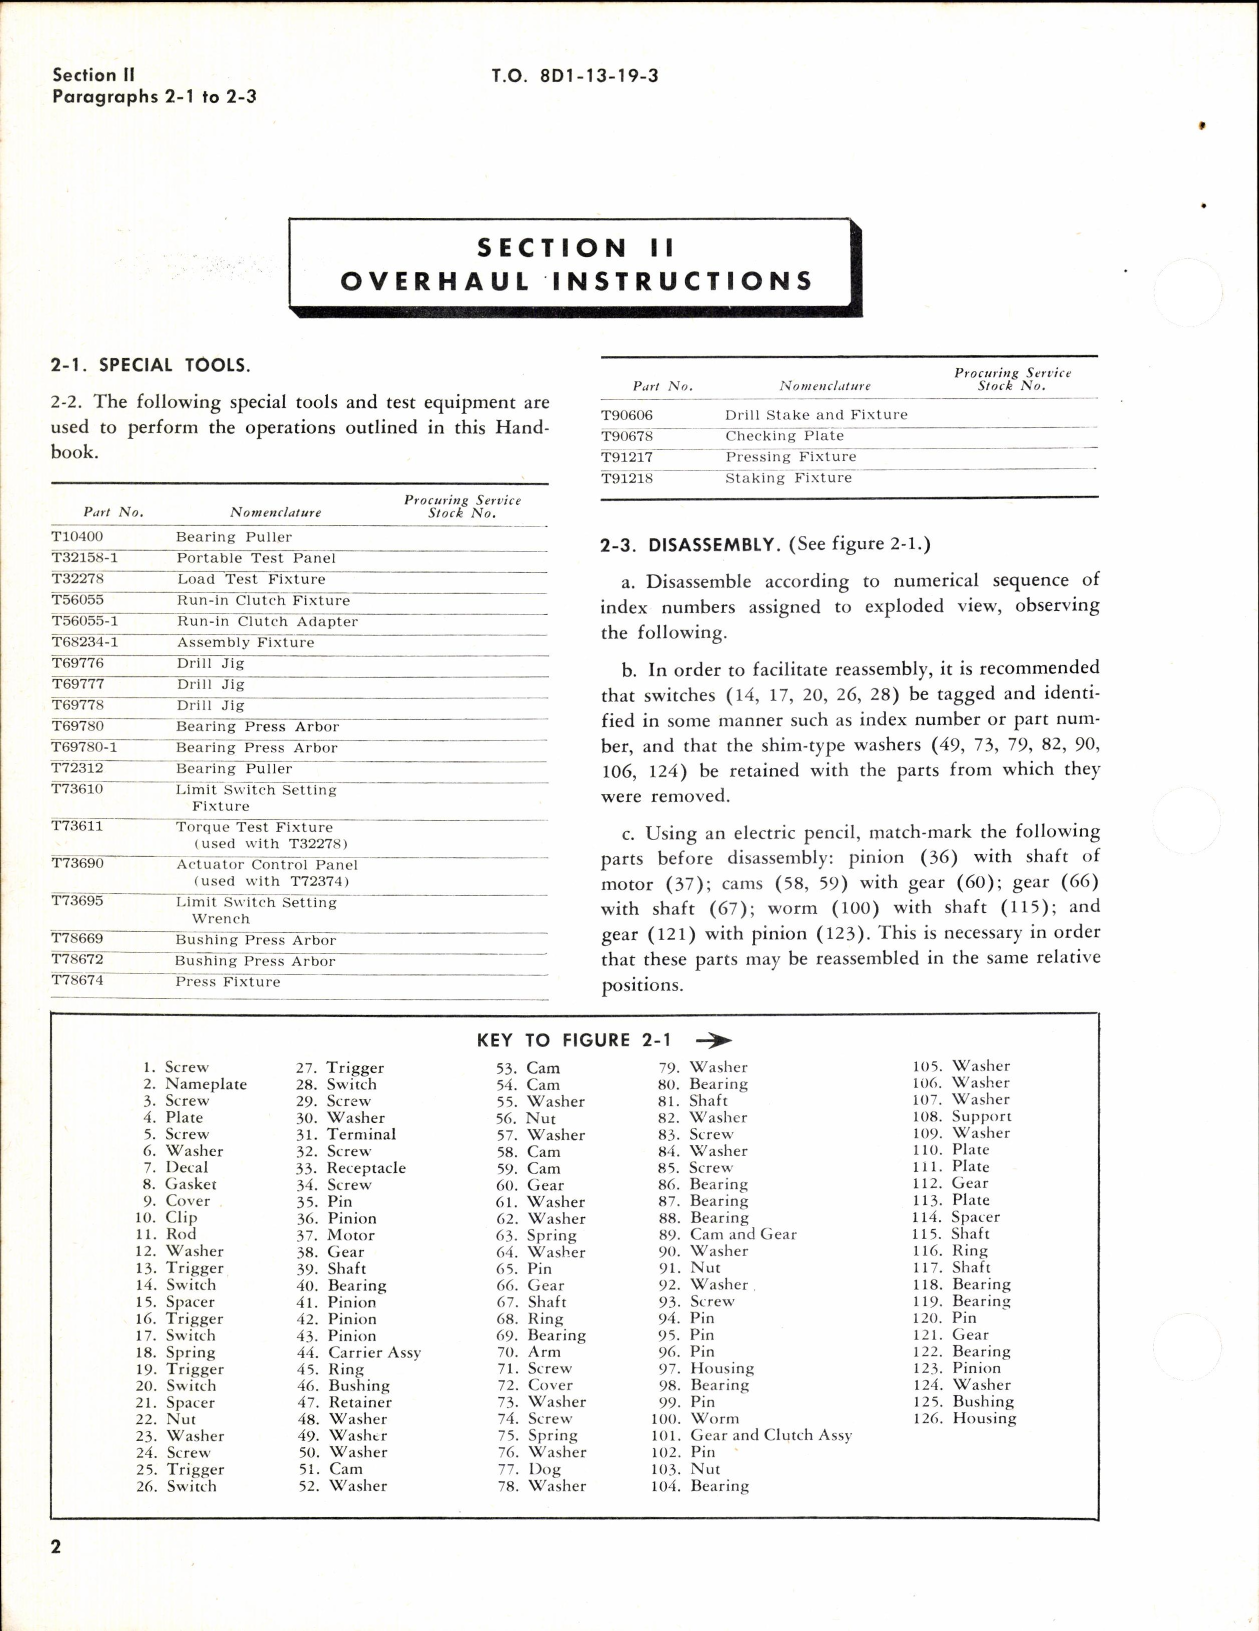 Sample page 4 from AirCorps Library document: Overhaul Instructions for Electromechanical Torque Actuators